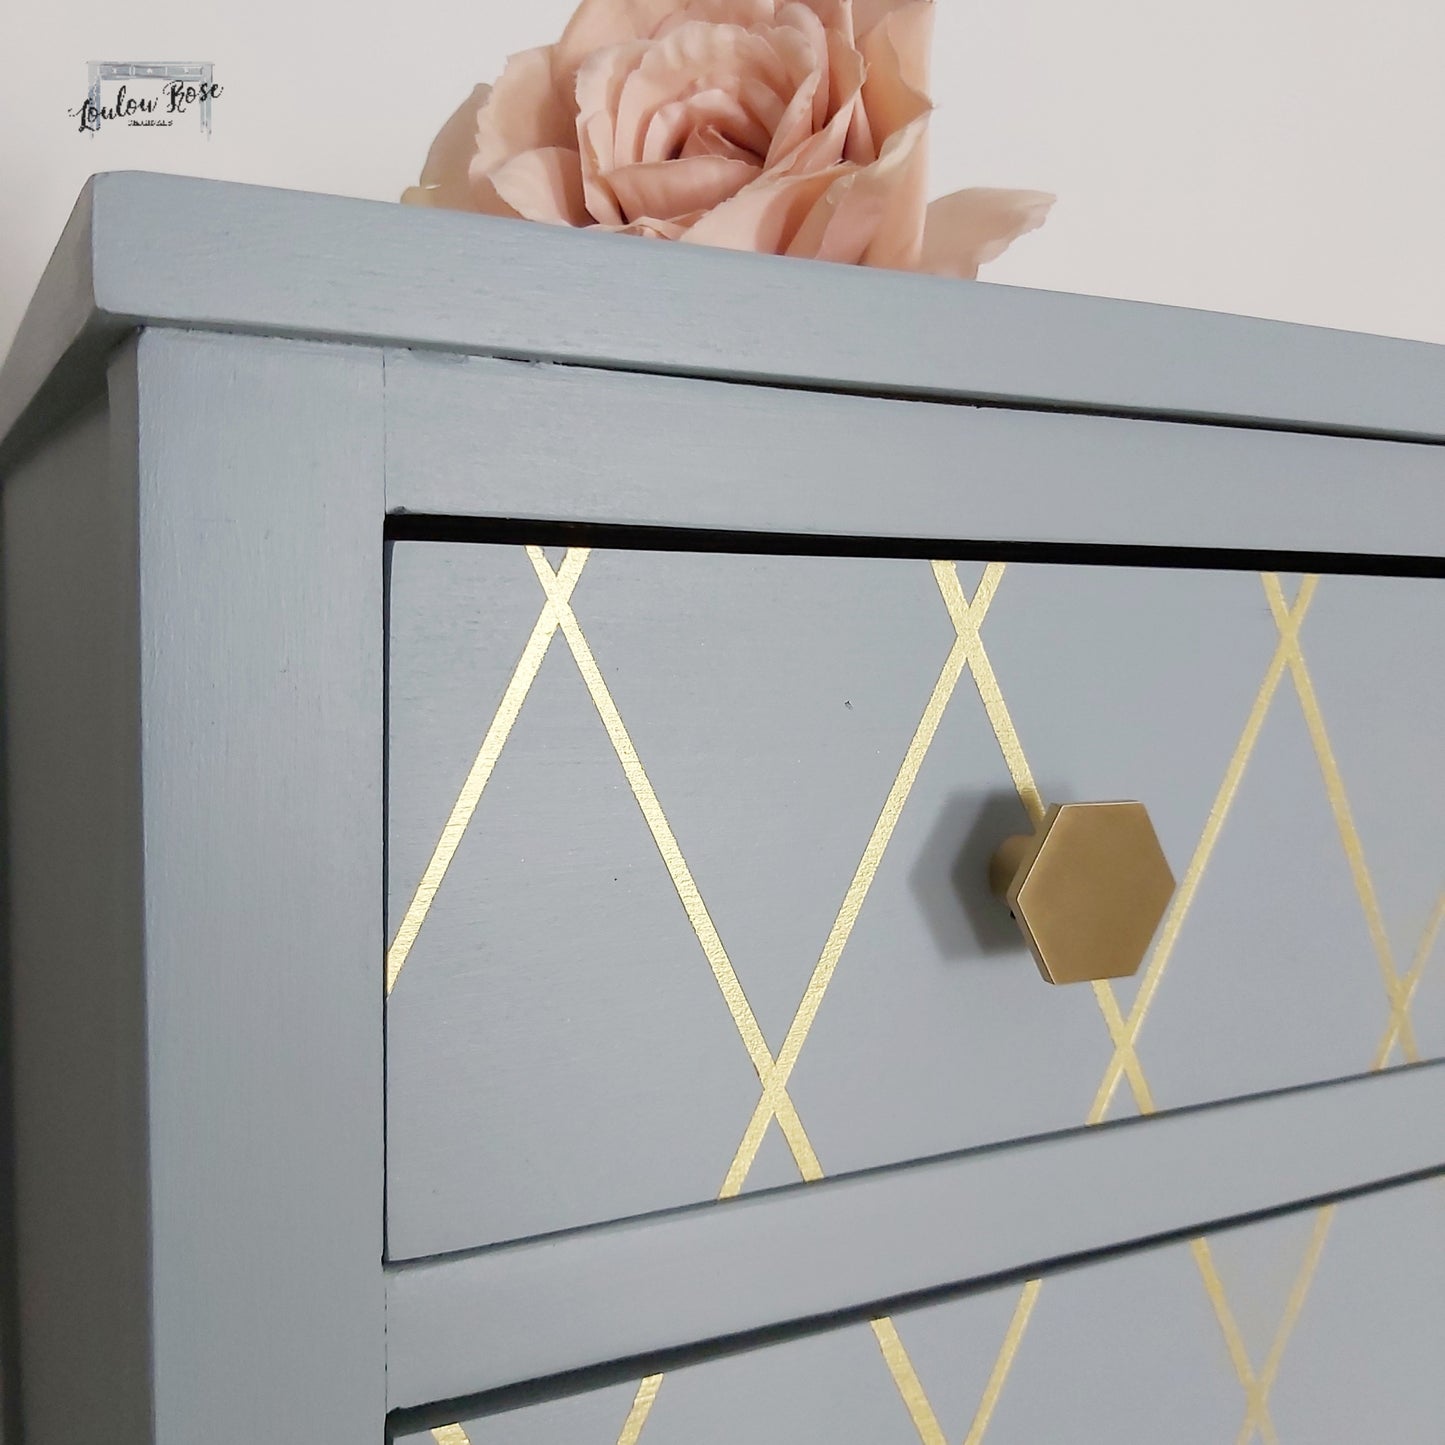 Chest of Drawers in Blue and Gold, Vintage with Queen Anne Legs and Geometric Diamond Design